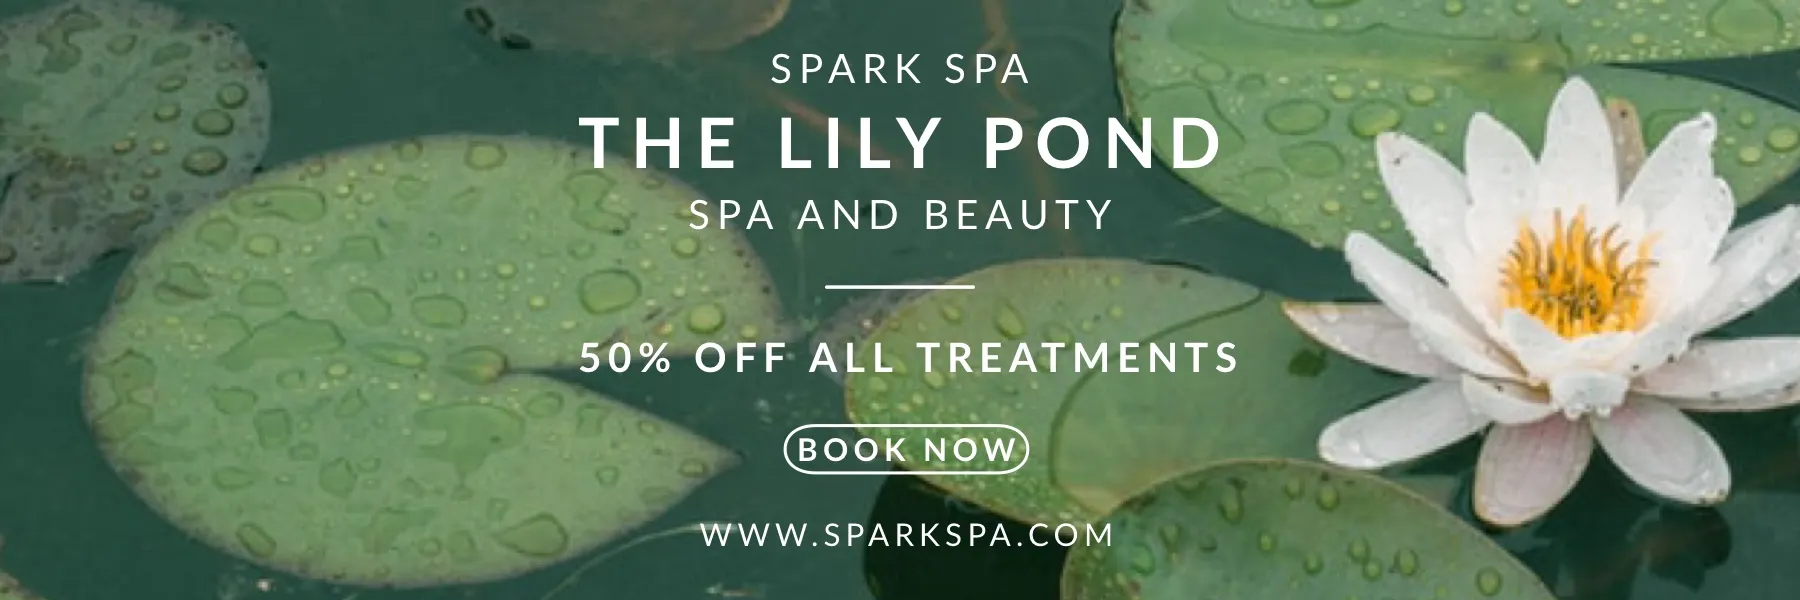 Green and White Spa Treatment Ad Facebook Banner